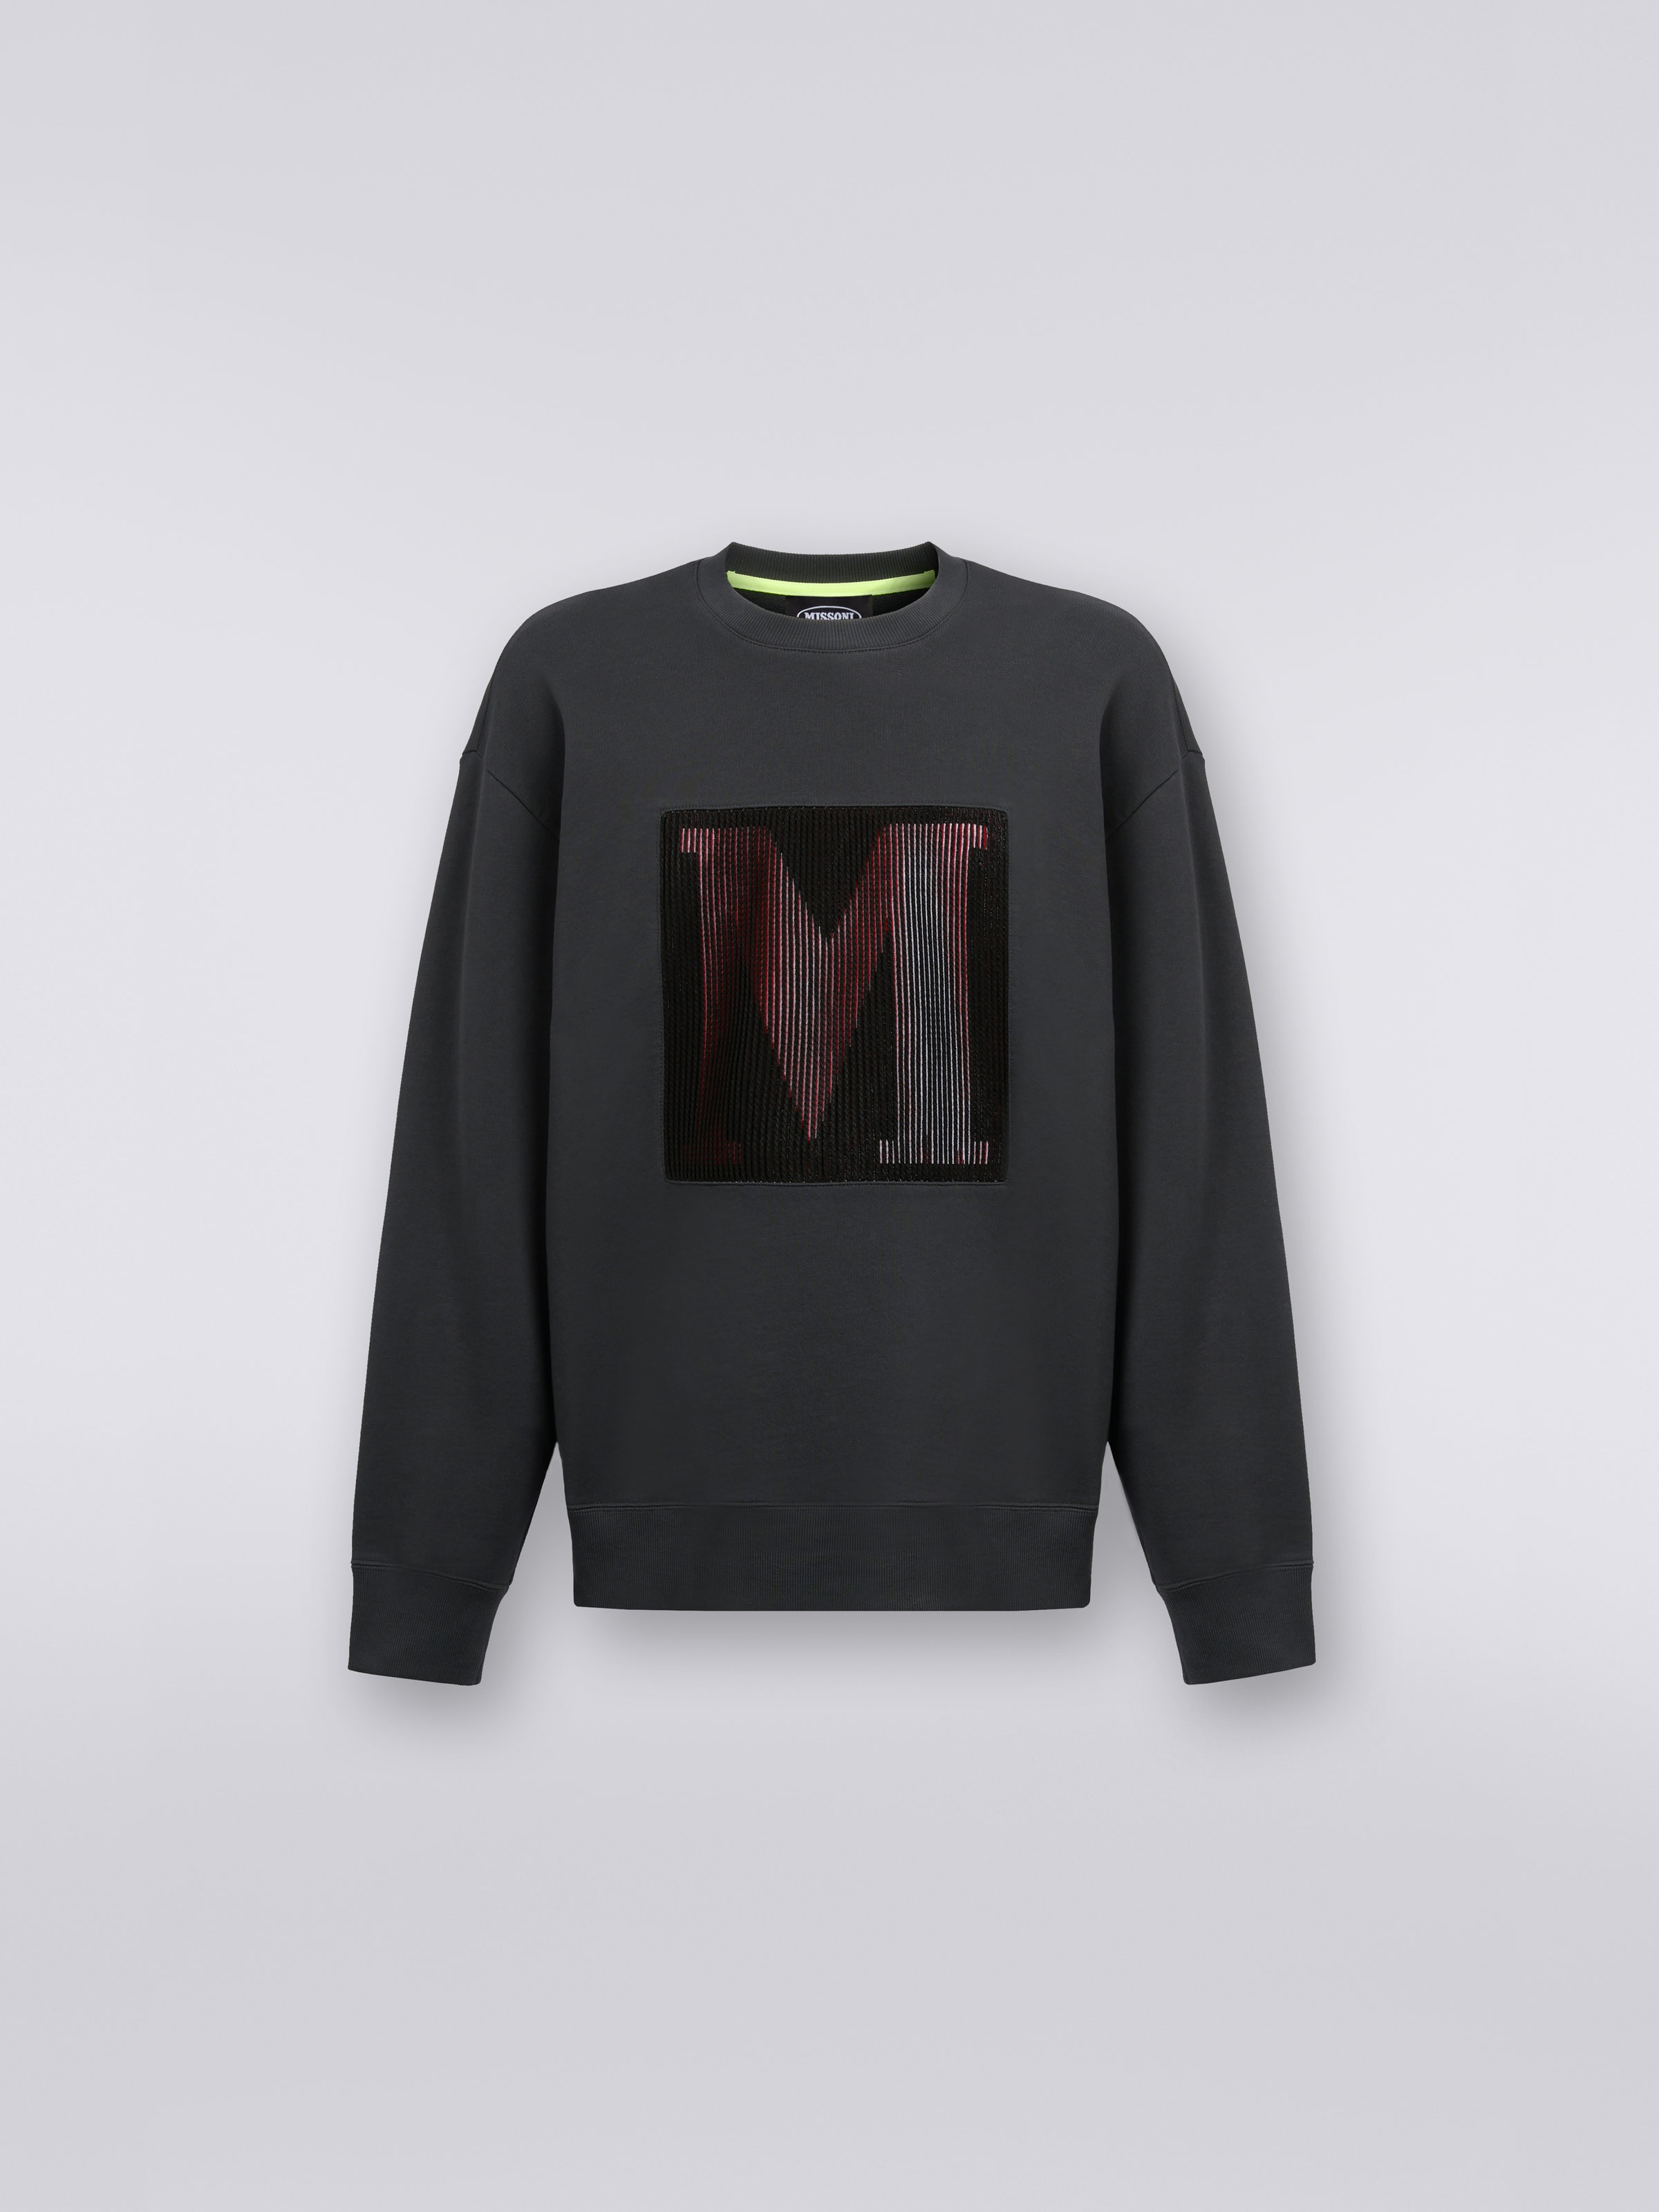 Cotton crew-neck sweatshirt with macro logo in collaboration with Mike Maignan, Grey - 0